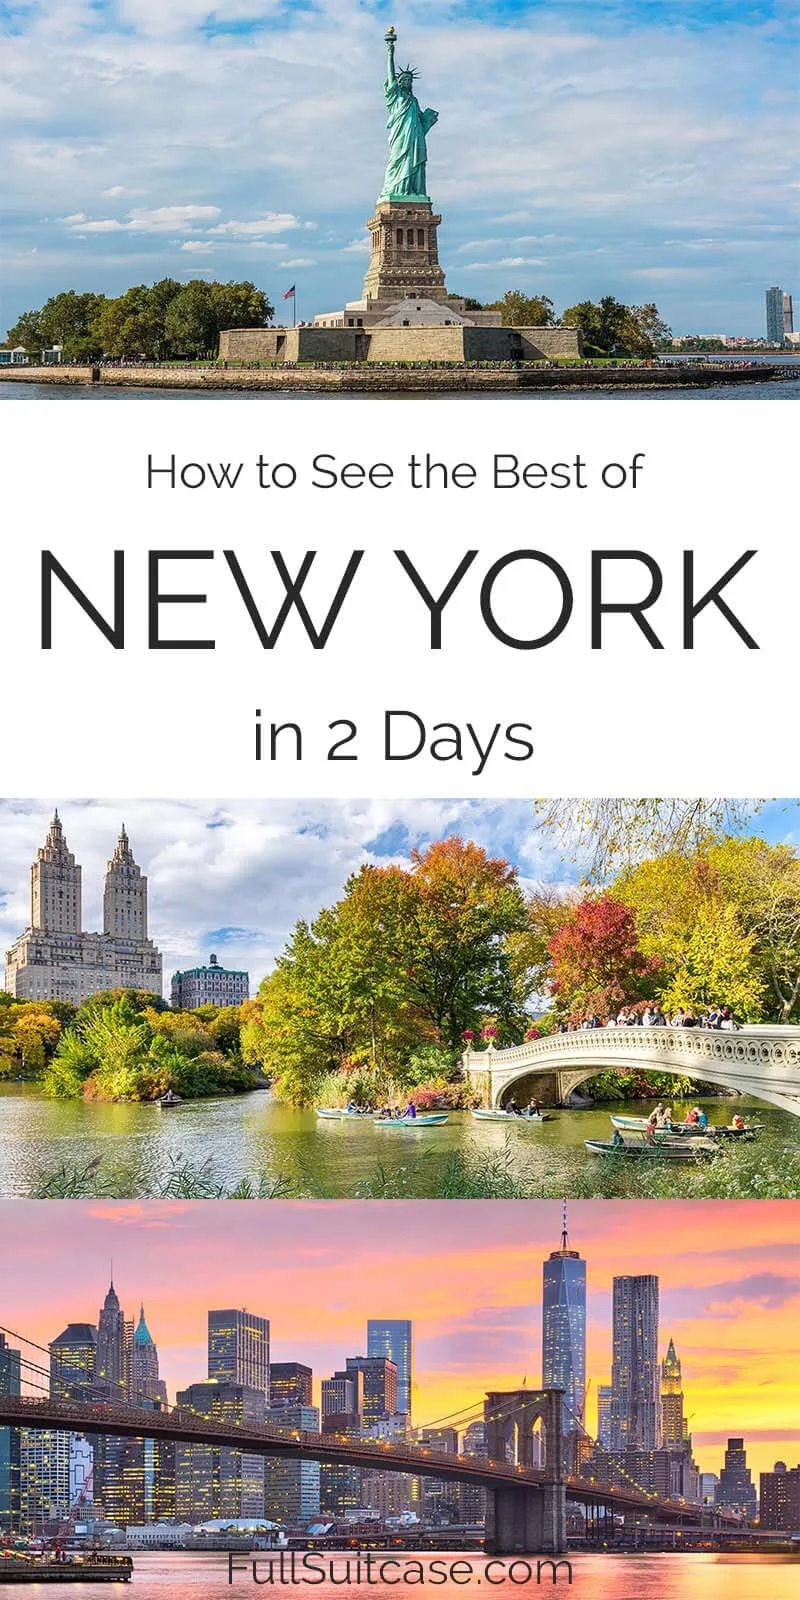 How to visit New York in 2 days (NYC two days itinerary)